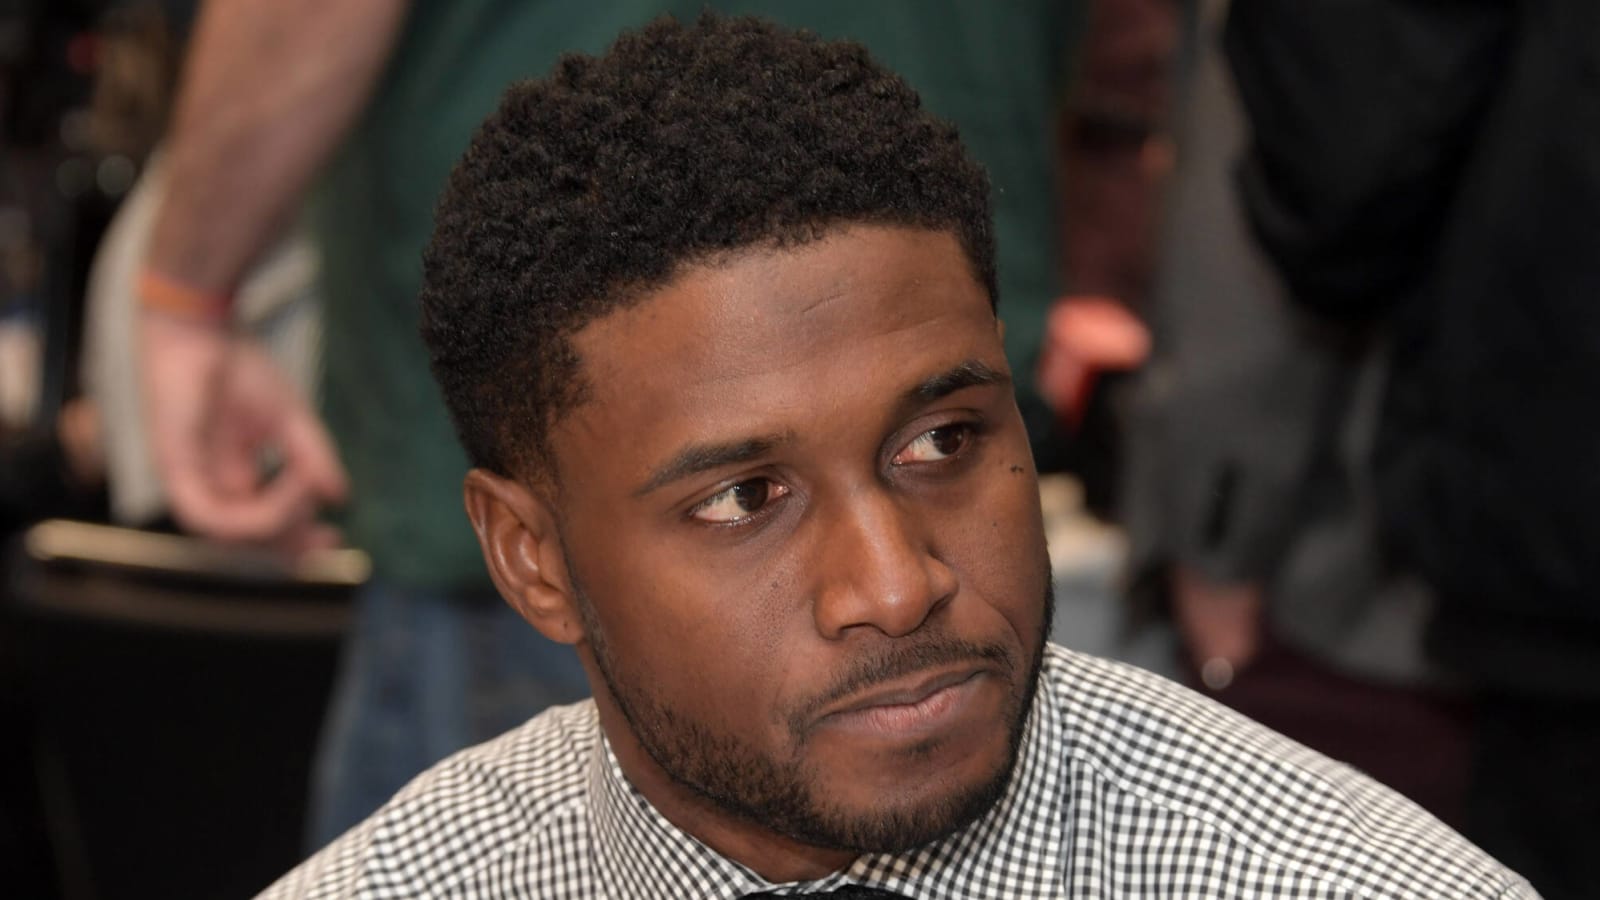 Reggie Bush lashes out at NCAA in series of tweets